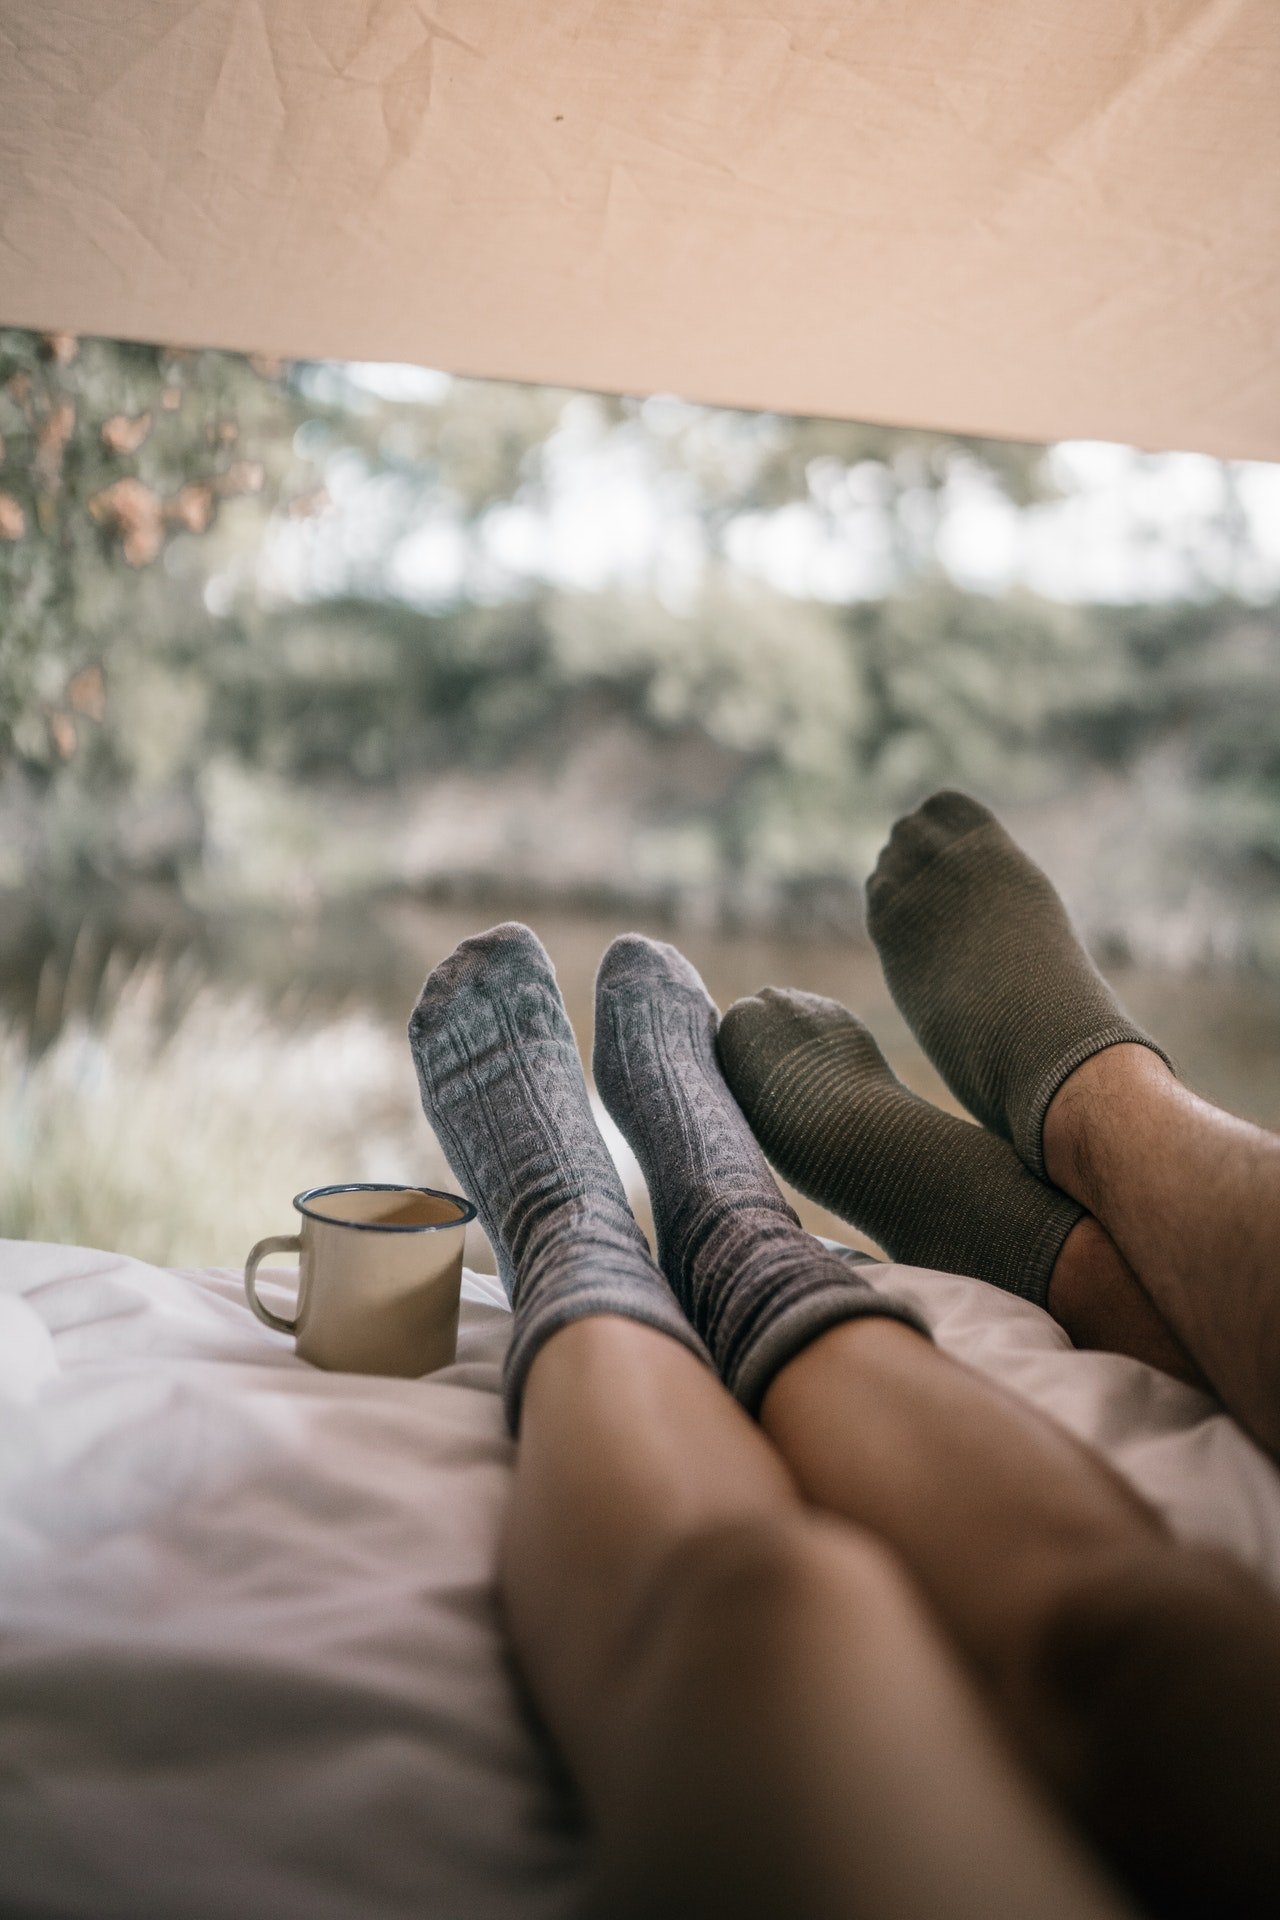 Photo of two people showing their legs on a bed | Photo: Pexels